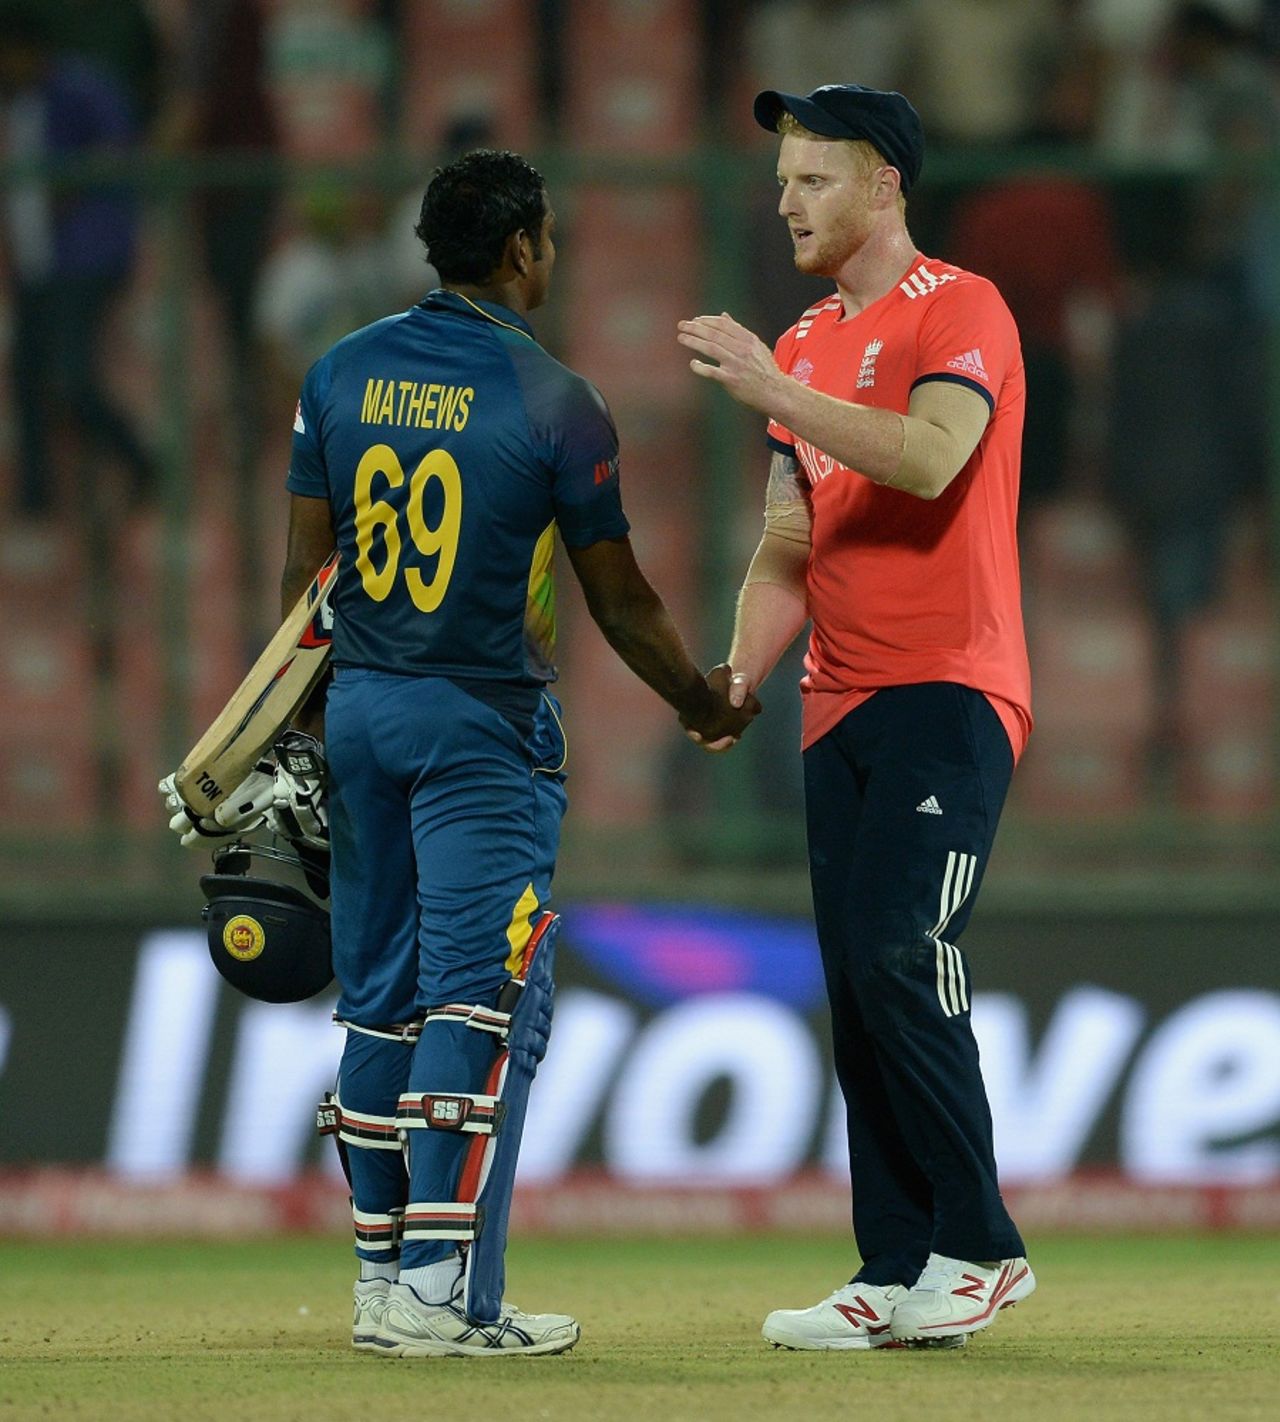 Ben Stokes and Angelo Mathews shake hands after the match, England v Sri Lanka, World T20 2016, Group 1, Delhi, March 26, 2016